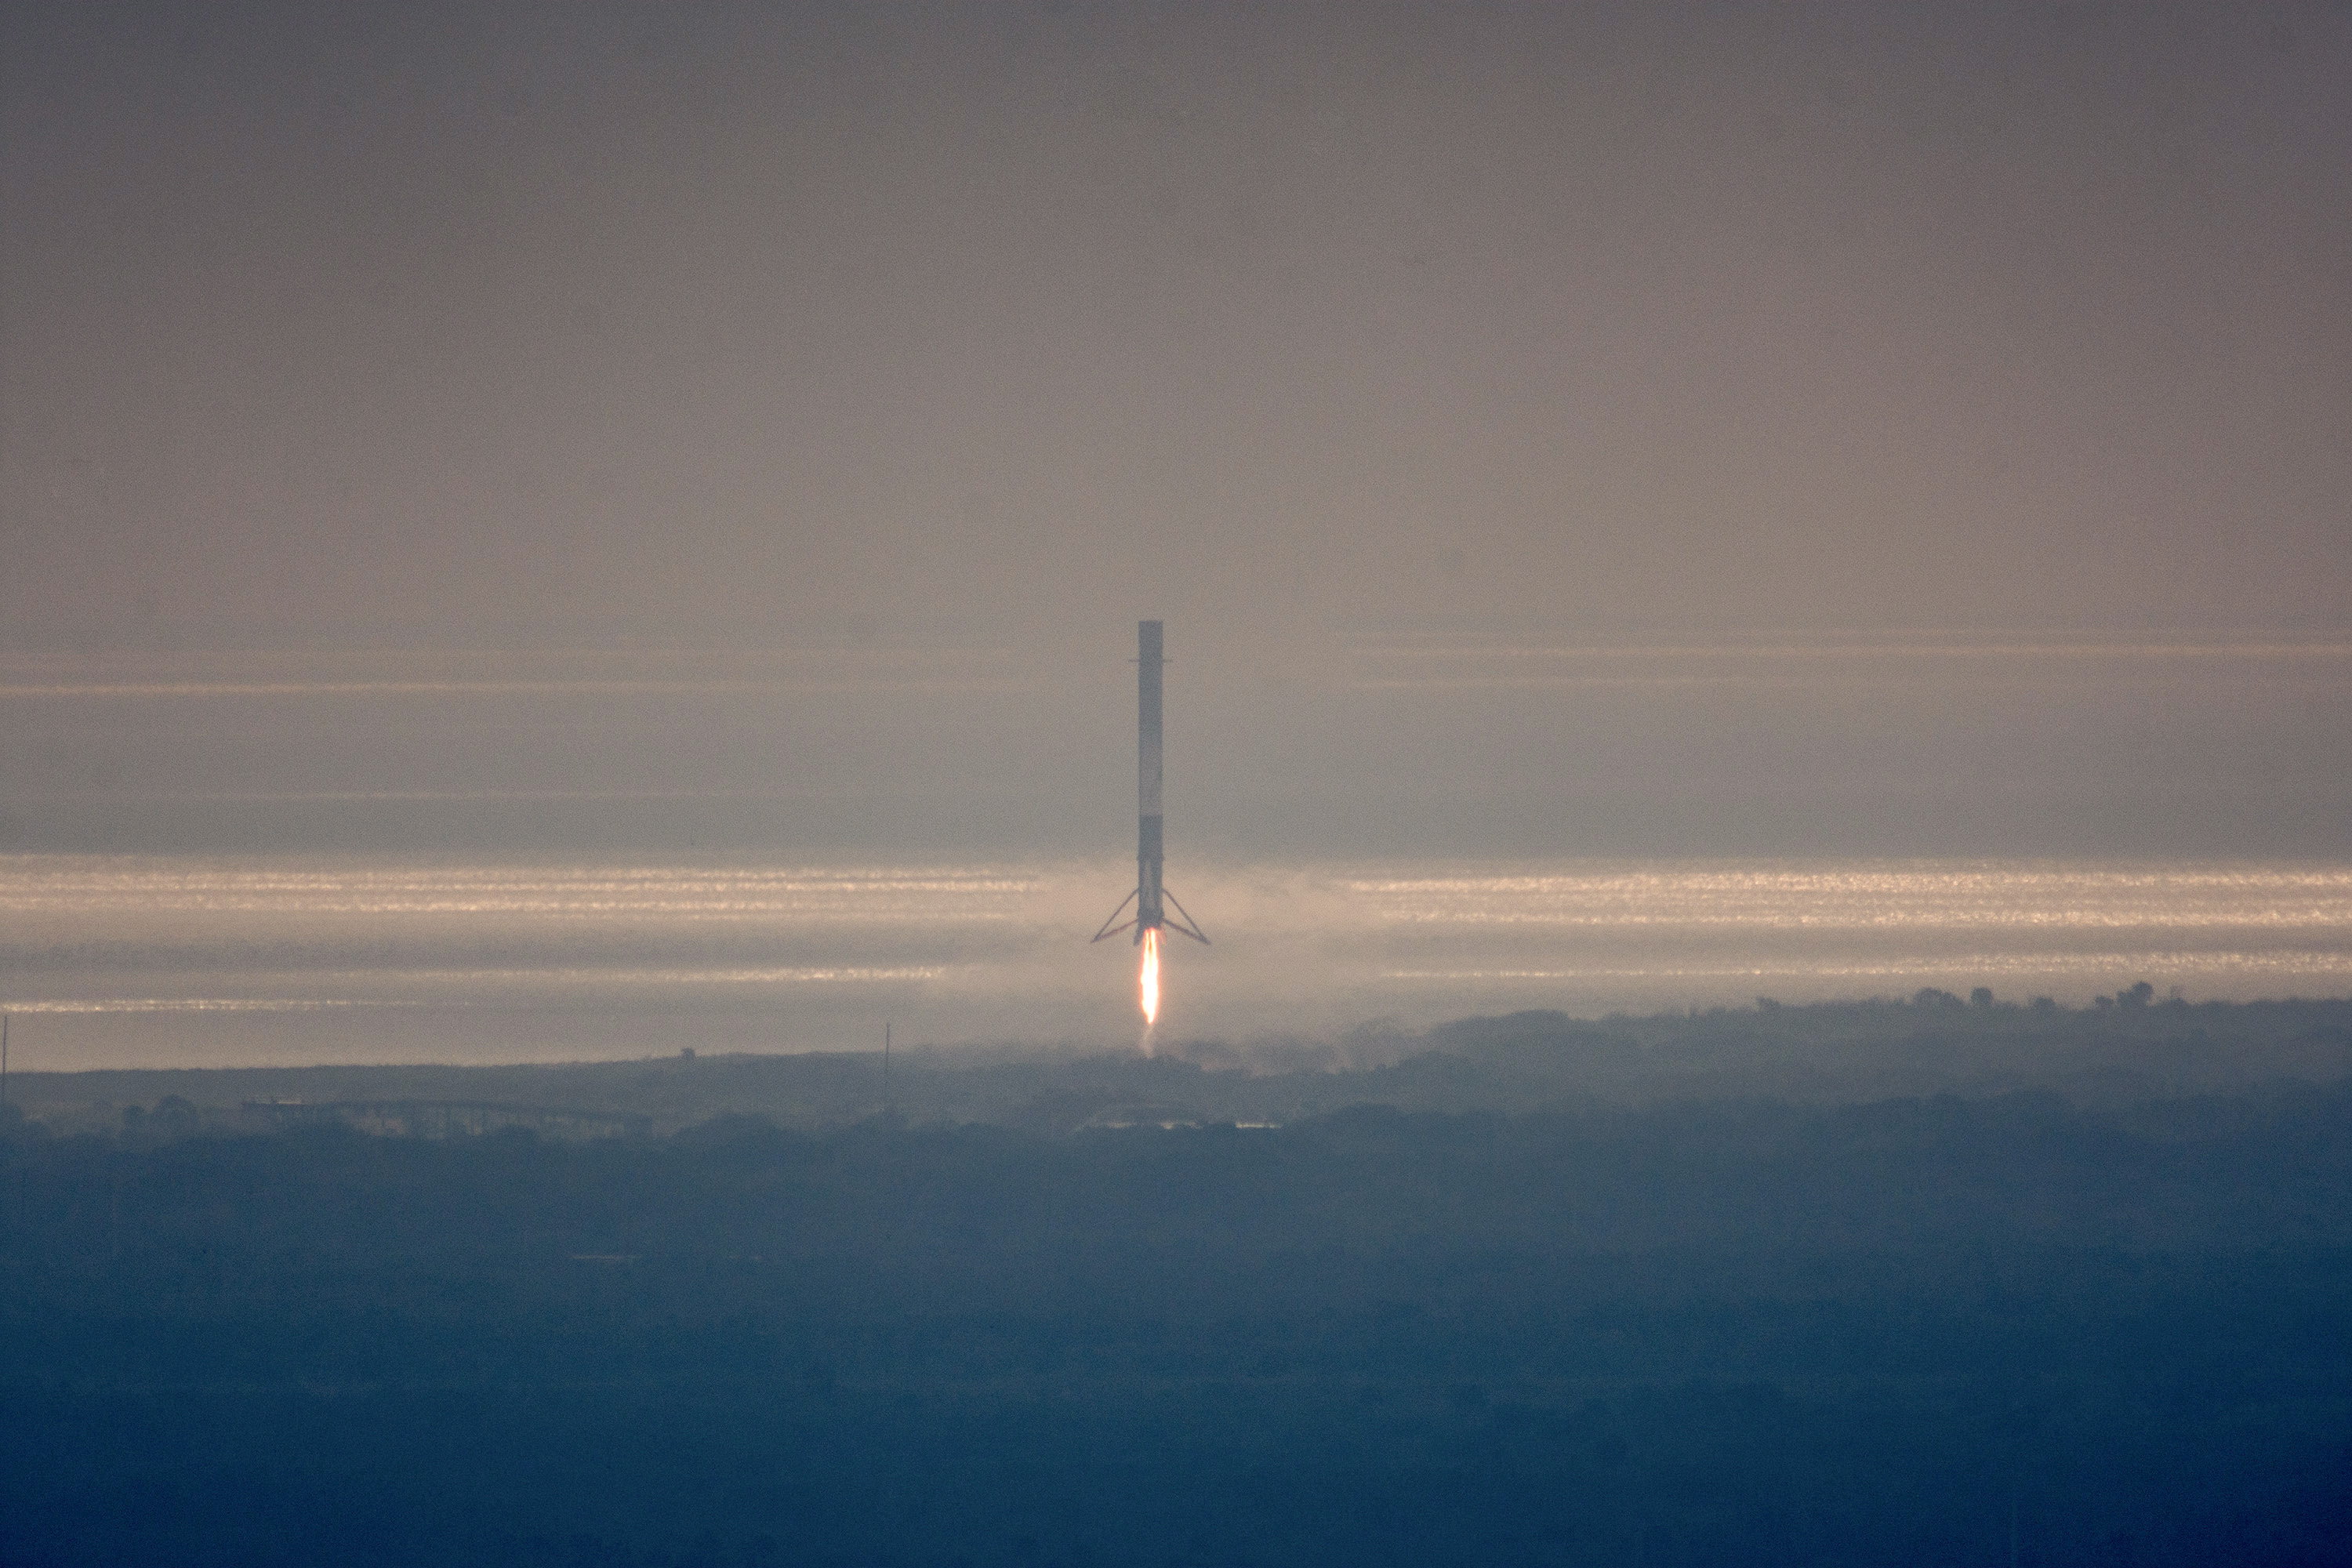 In Photos: SpaceX's 1st Launch from NASA's Historic Pad 39A